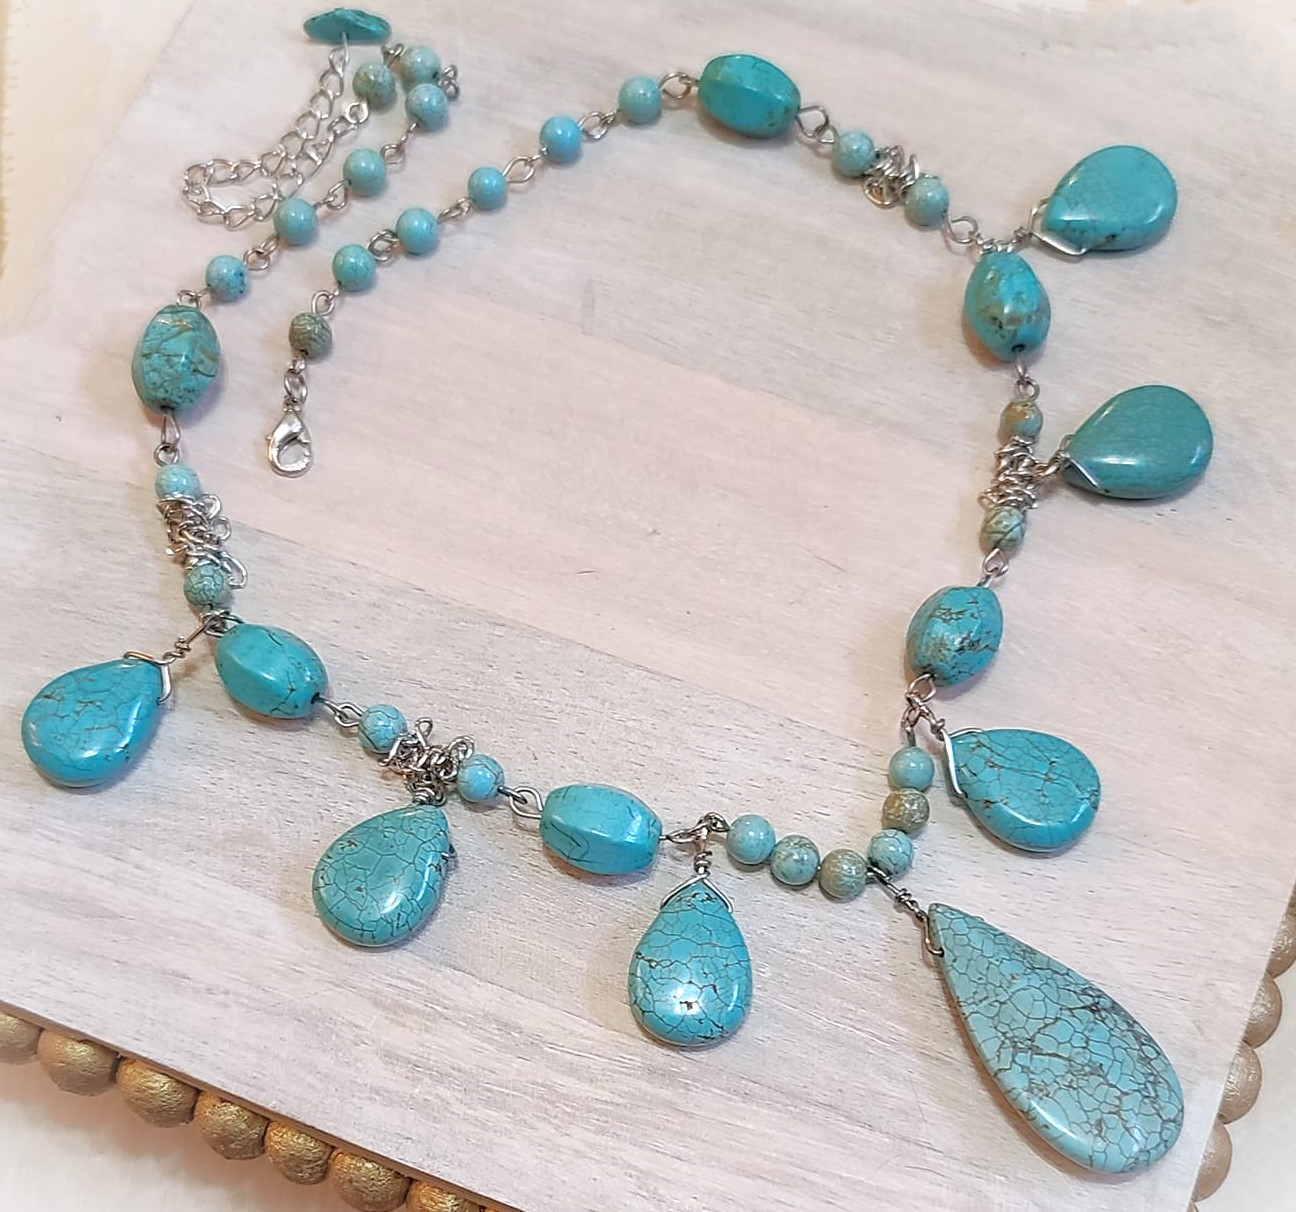 Turquoise gemstone tear drop necklace